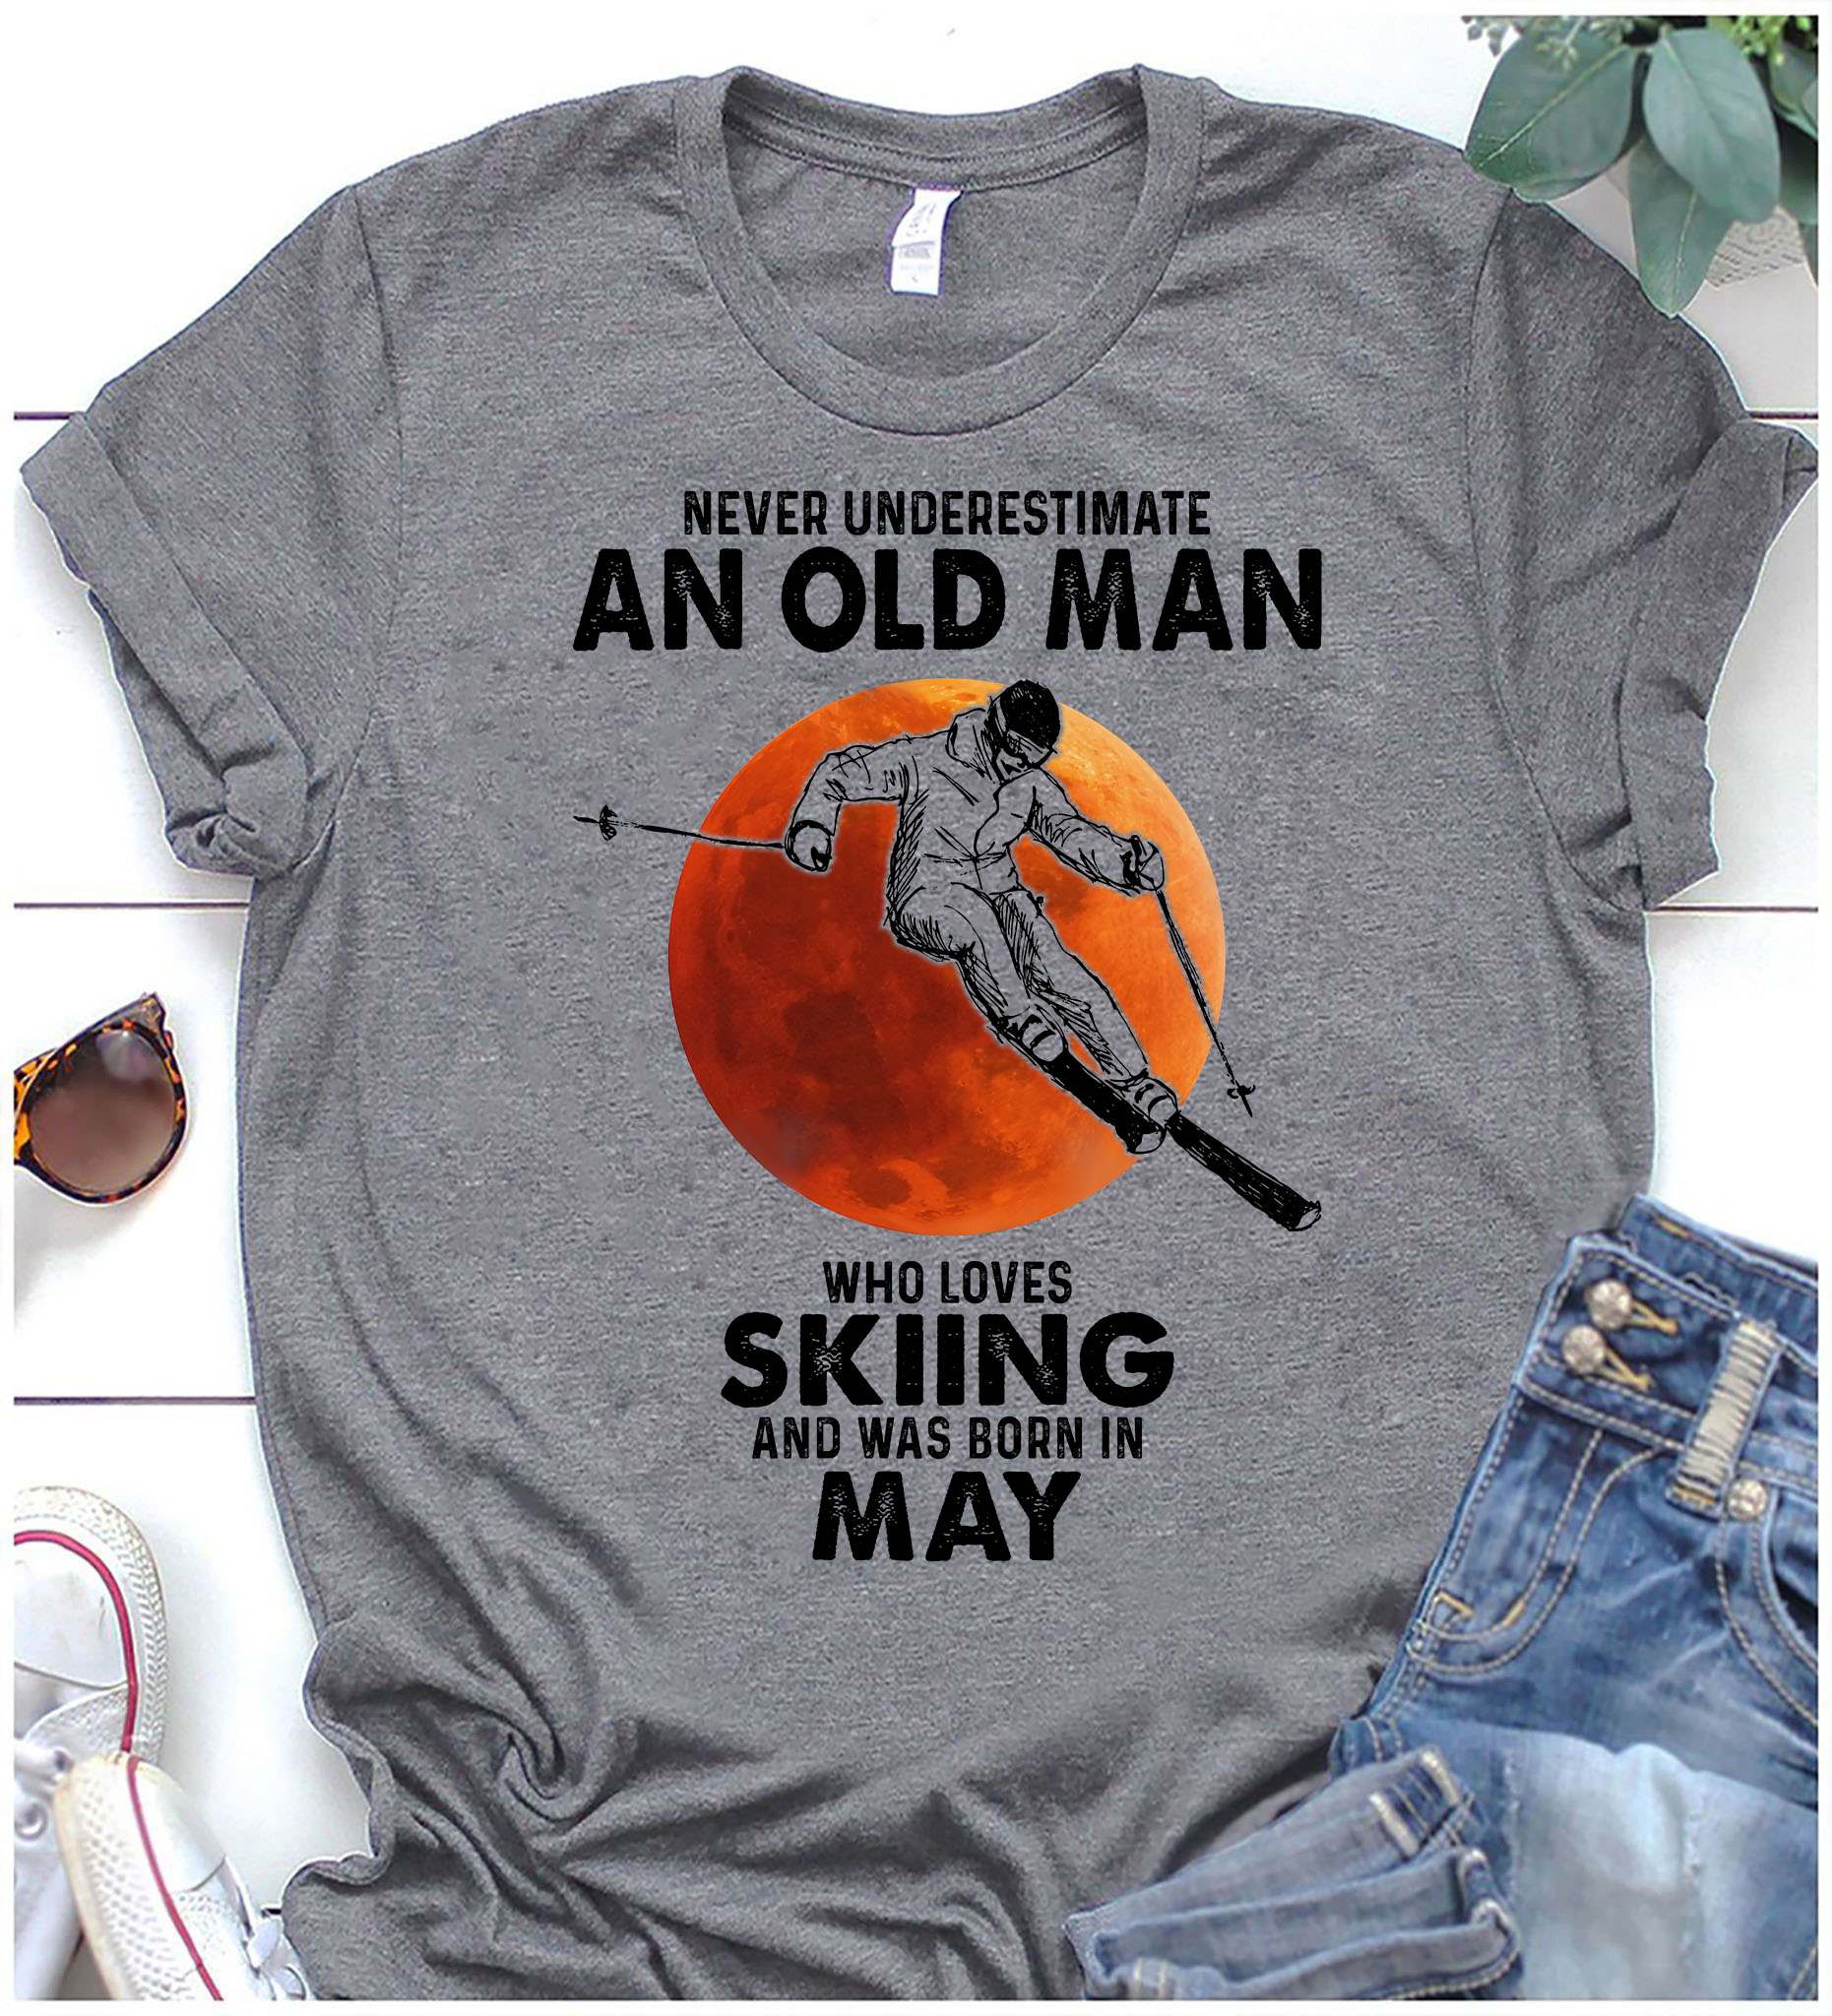 Man Skiing, May Birthday Man - Never underestimate an old man who loves skiing and was born in may